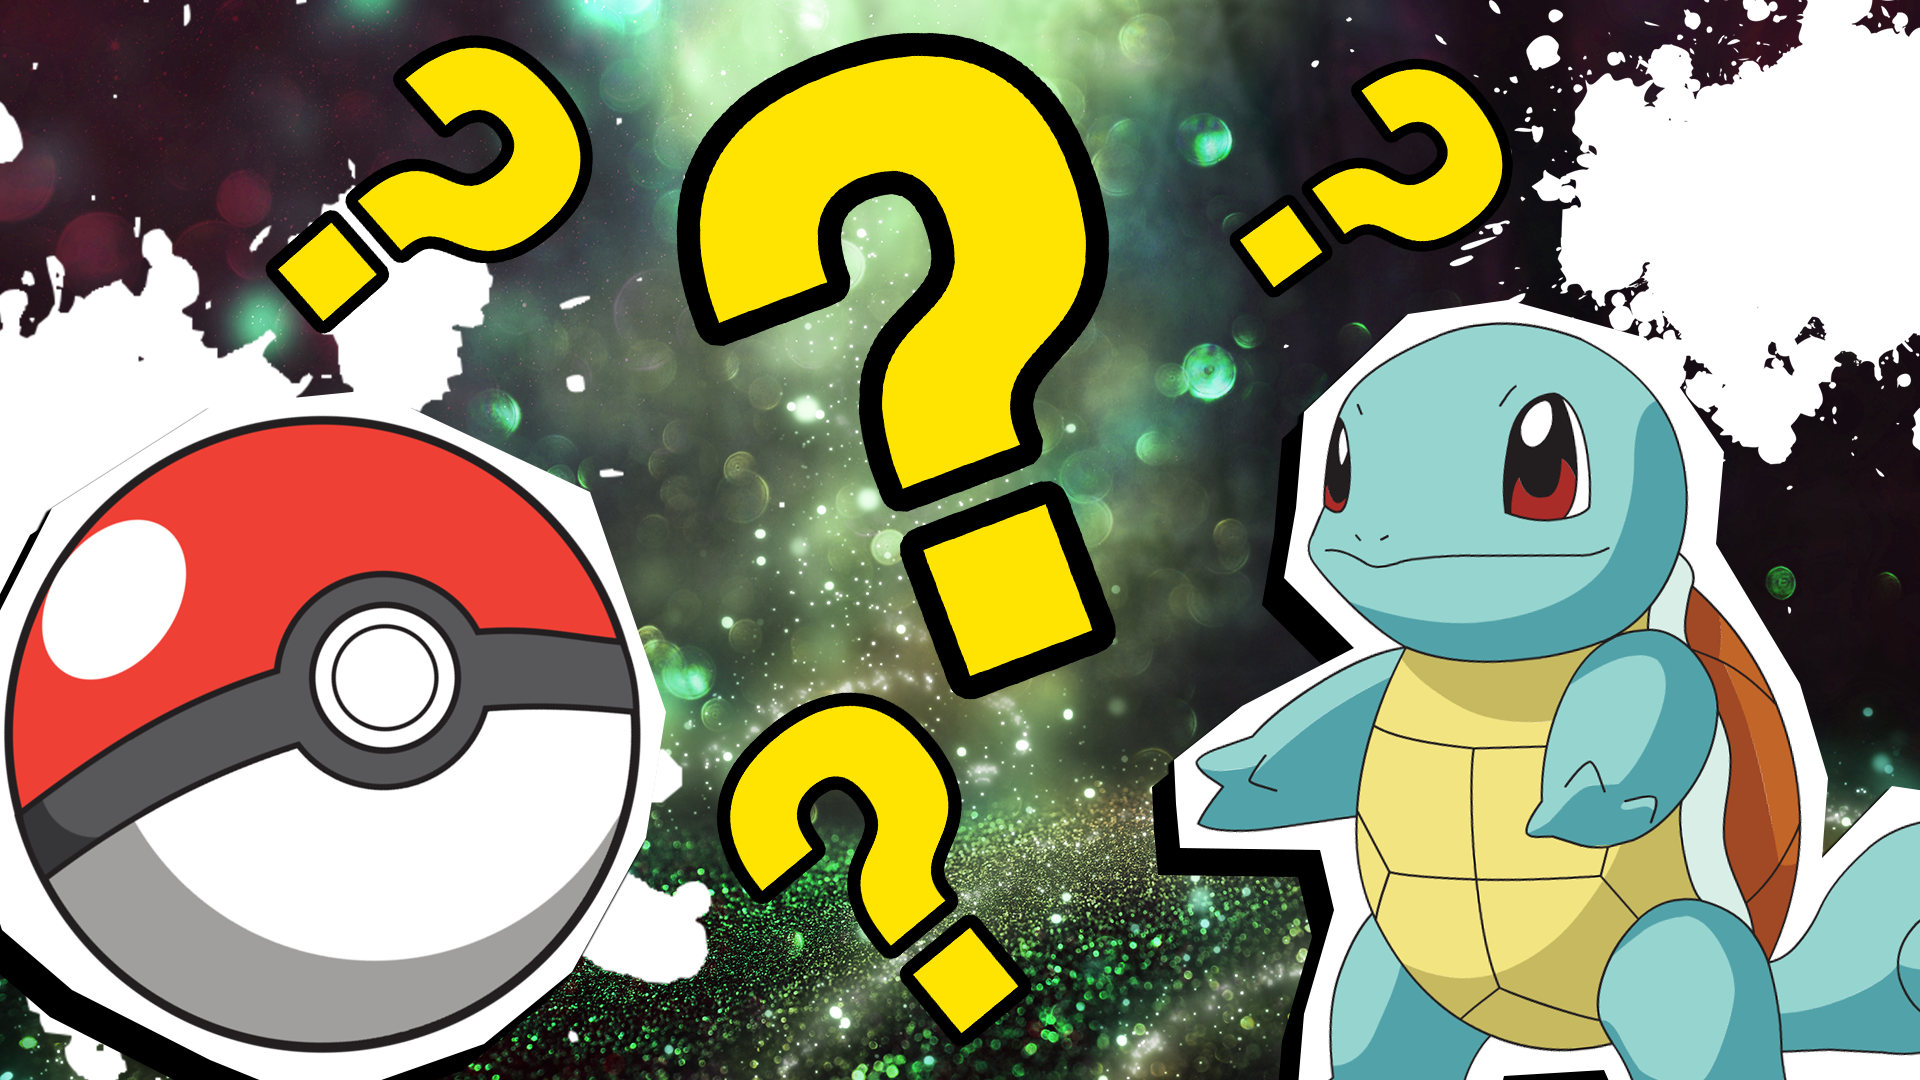 Which Pokemon Type Are You? Take Our Quiz to Find Out